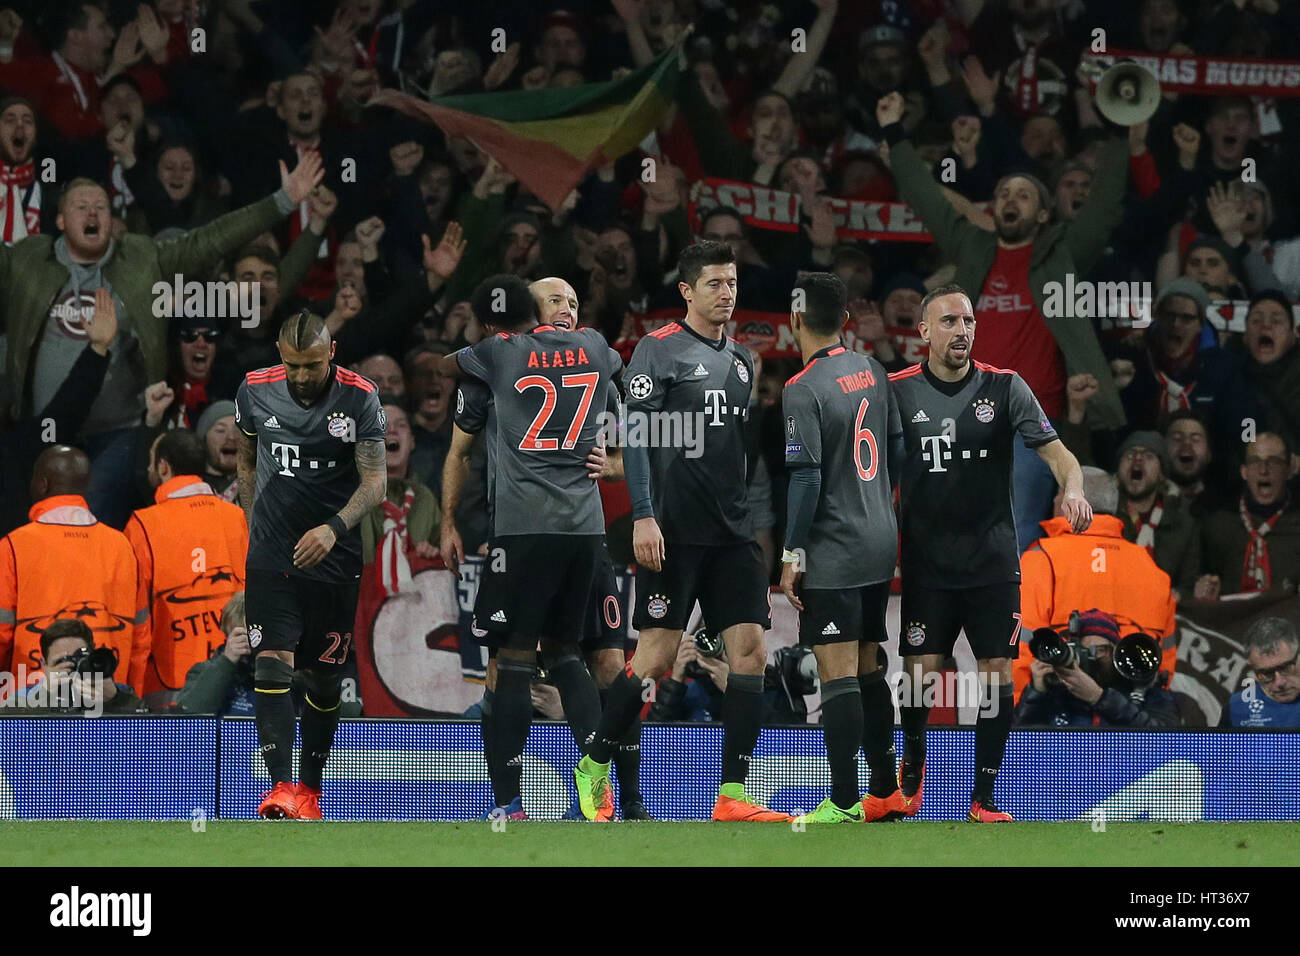 London, UK. 7th Mar, 2017. Arjen Robben (3rd L) of Bayern Munich celebrates scoring with teammates during the UEFA Champions League Round of 16 second leg match between Arsenal and Bayern Munich in London, Britain on March 7, 2017. Bayern Munich won 5-1 and advanced to the quarterfinal with 10-2 on aggregate. Credit: Tim Ireland/Xinhua/Alamy Live News Stock Photo